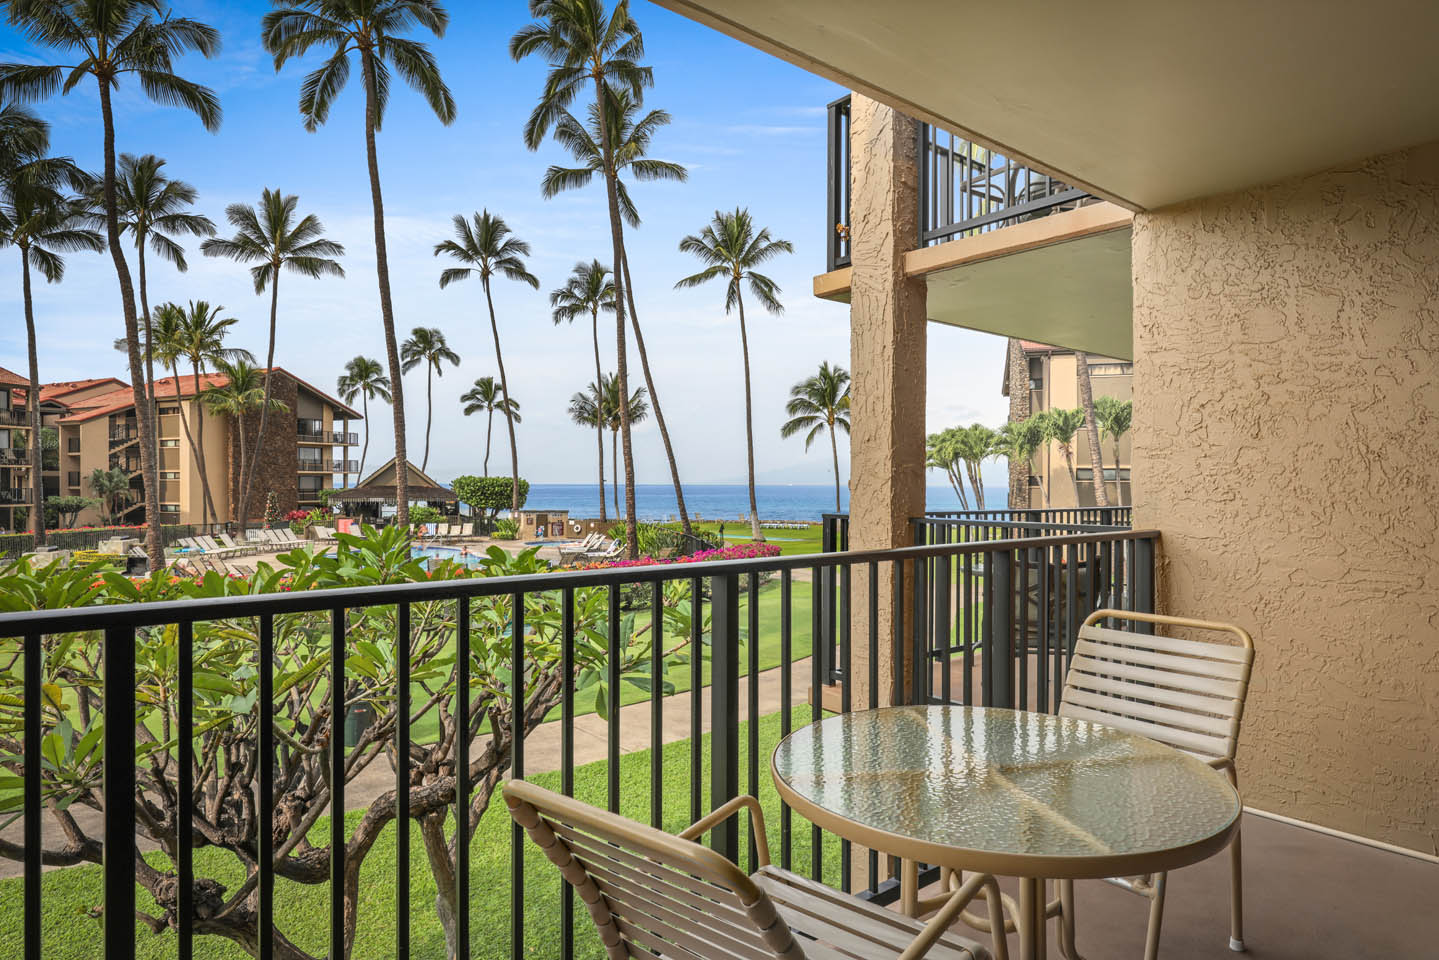 Studio Ocean View lanai with seating area overlooking the grounds and the ocean  